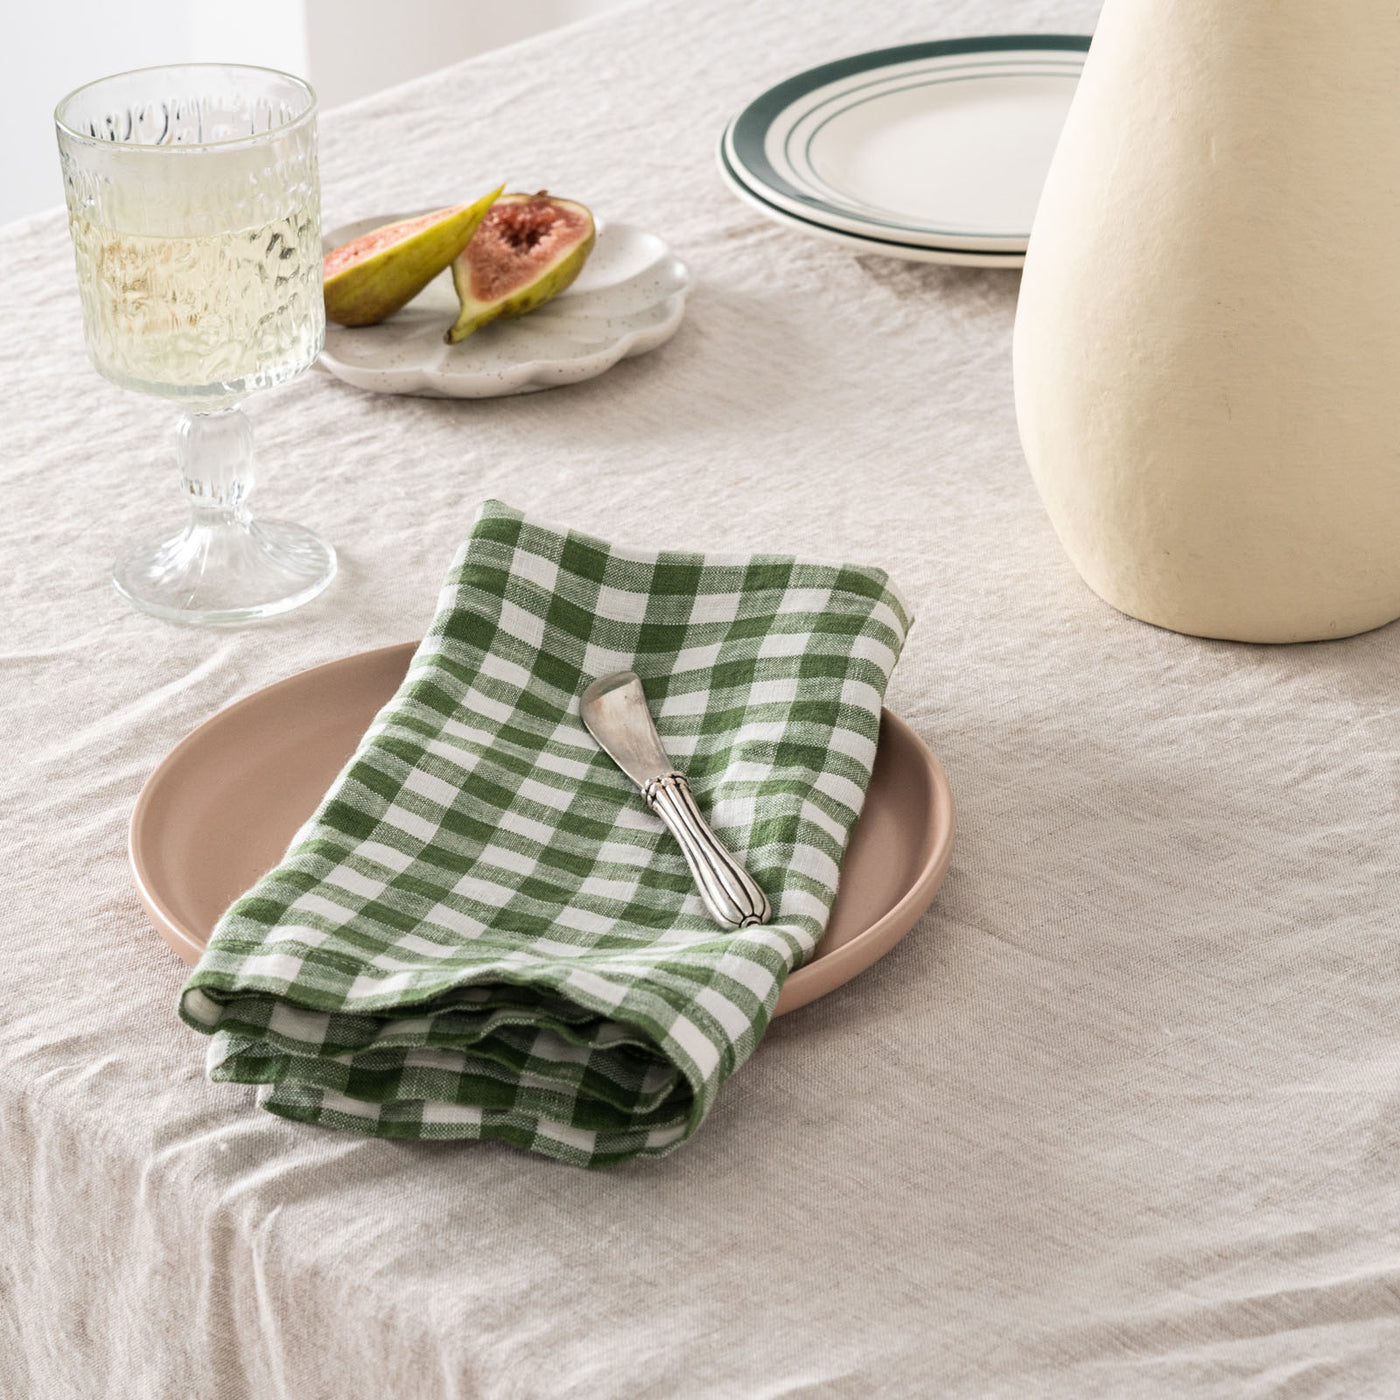 French Flax Linen Napkins (Set Of 4) in Ivy Gingham